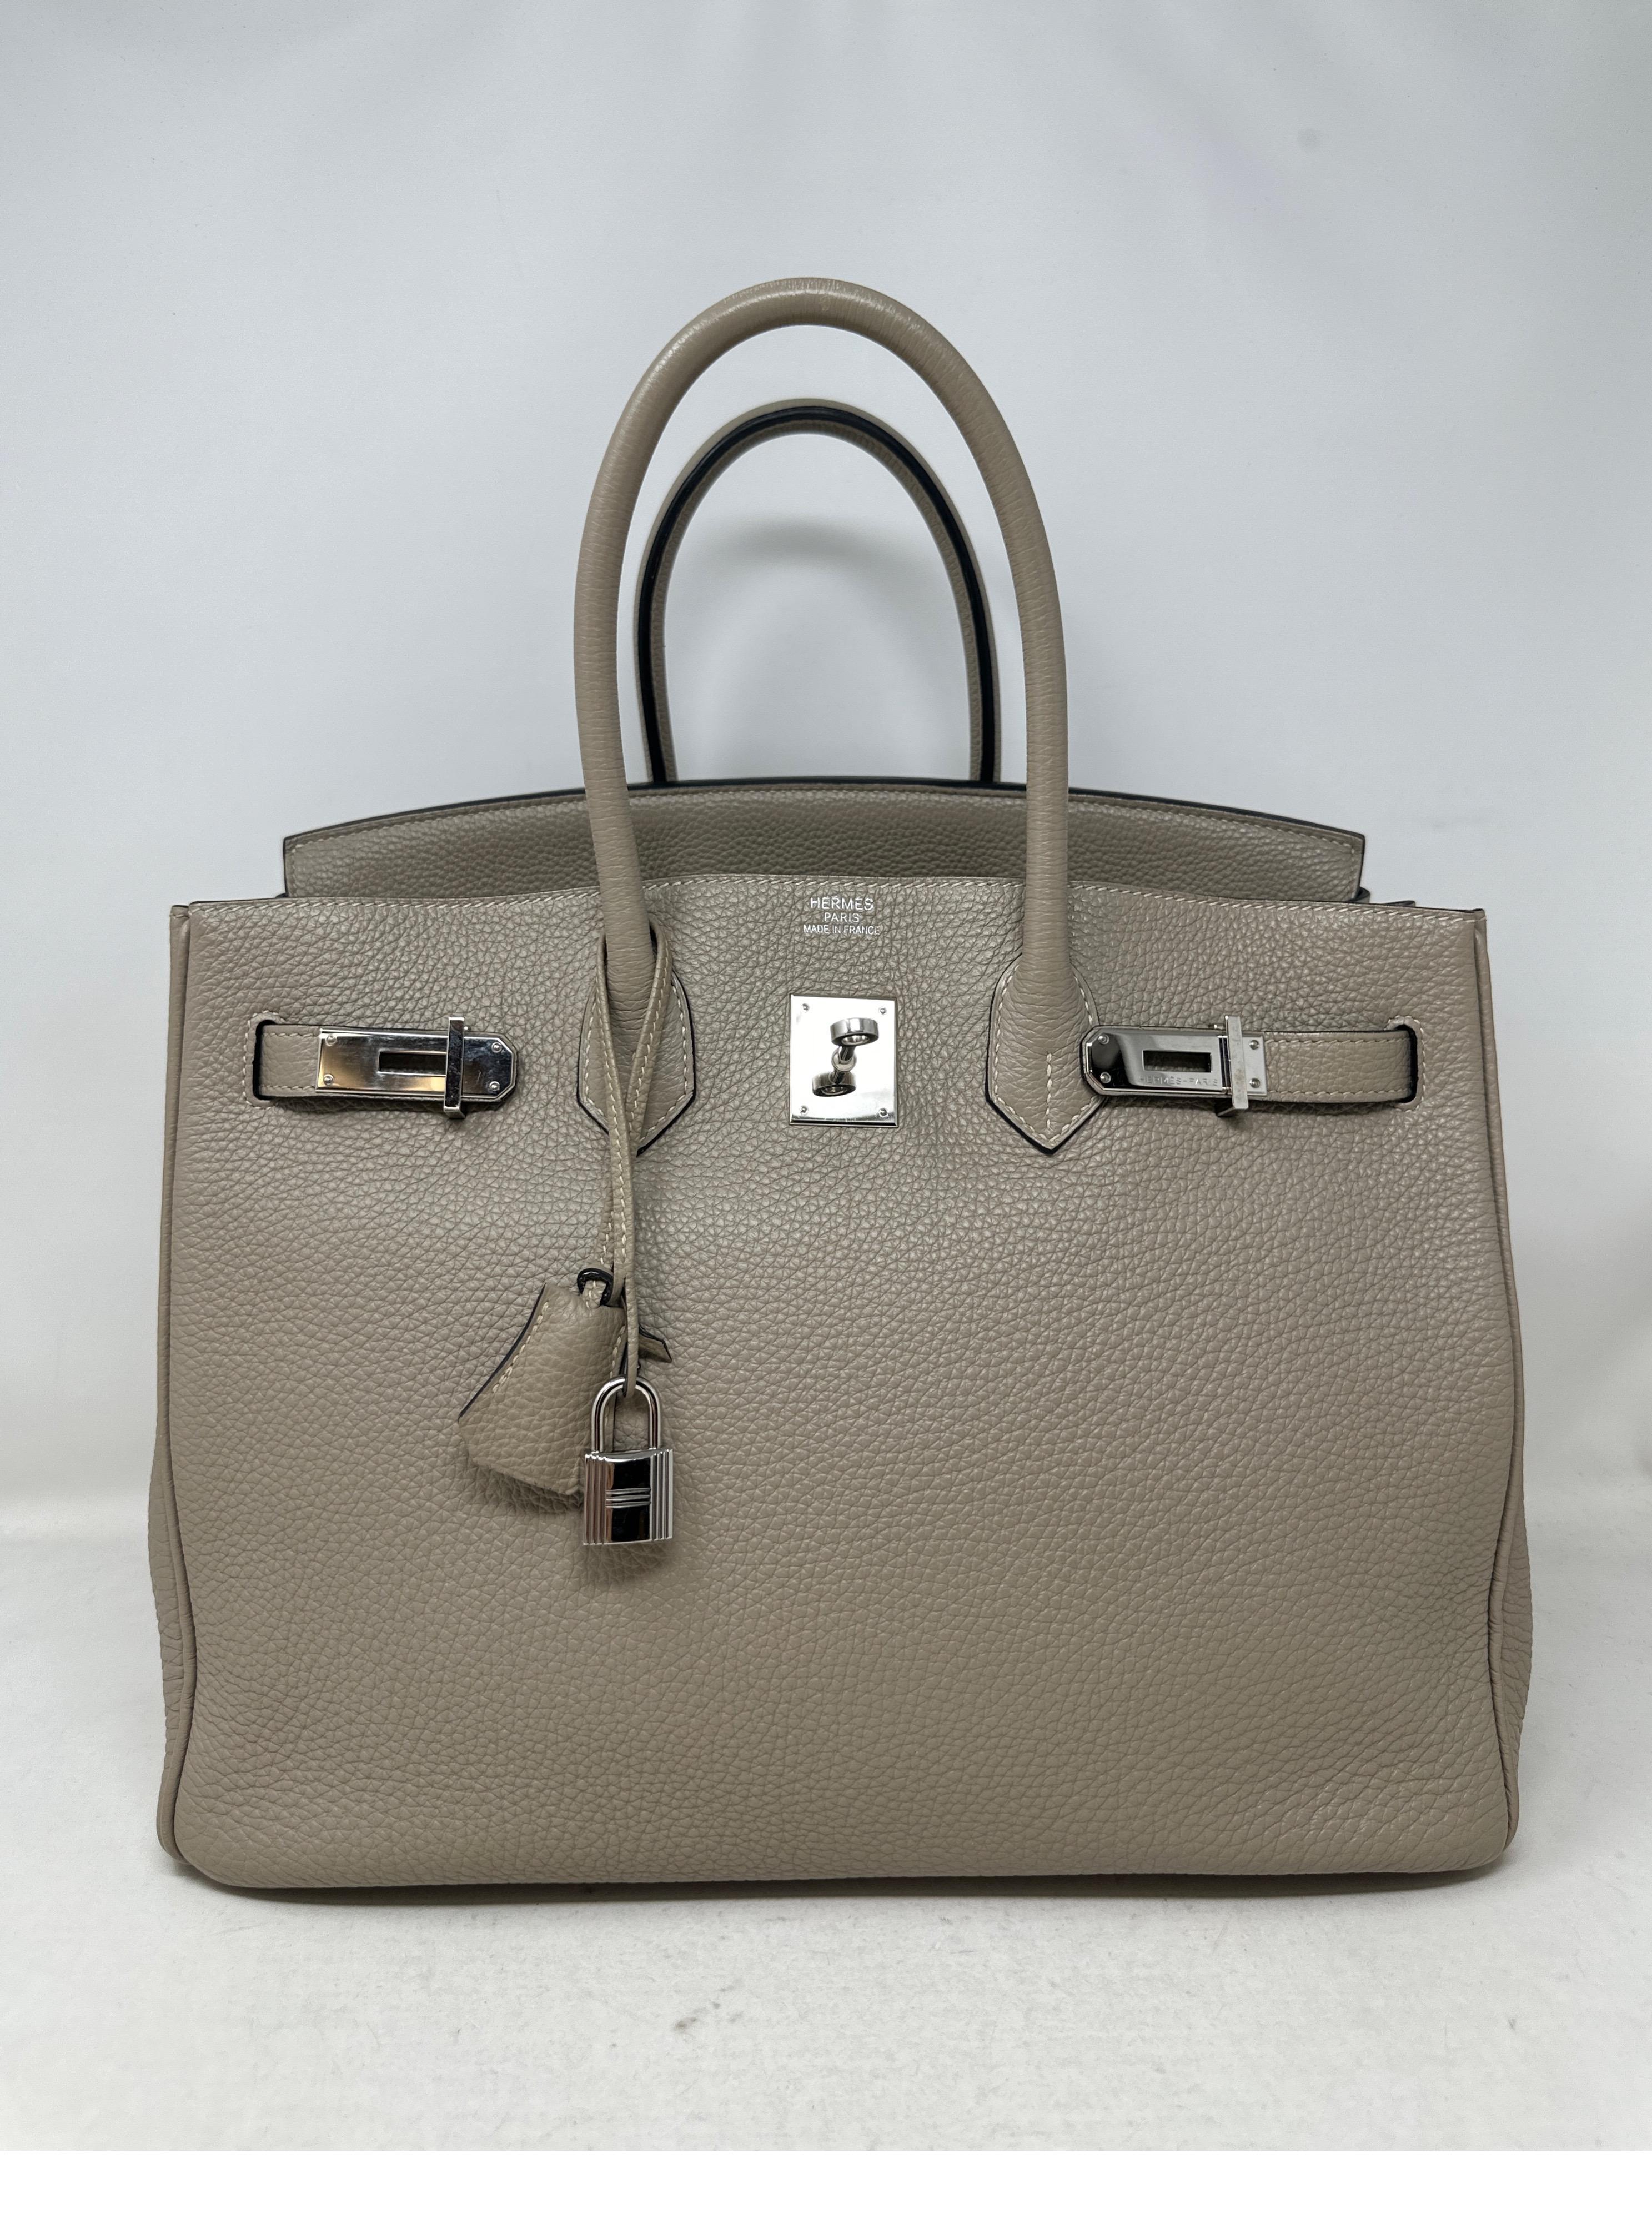 Hermes Gris Tourterelle Birkin 35 Bag. Excellent condition. Looks like new. Palladium silver hardware. Interior clean. Plastic is still on the hardware. Togo leather. Beautiful bag. Includes clochette, lock, keys, and dust bag. Guaranteed authentic. 